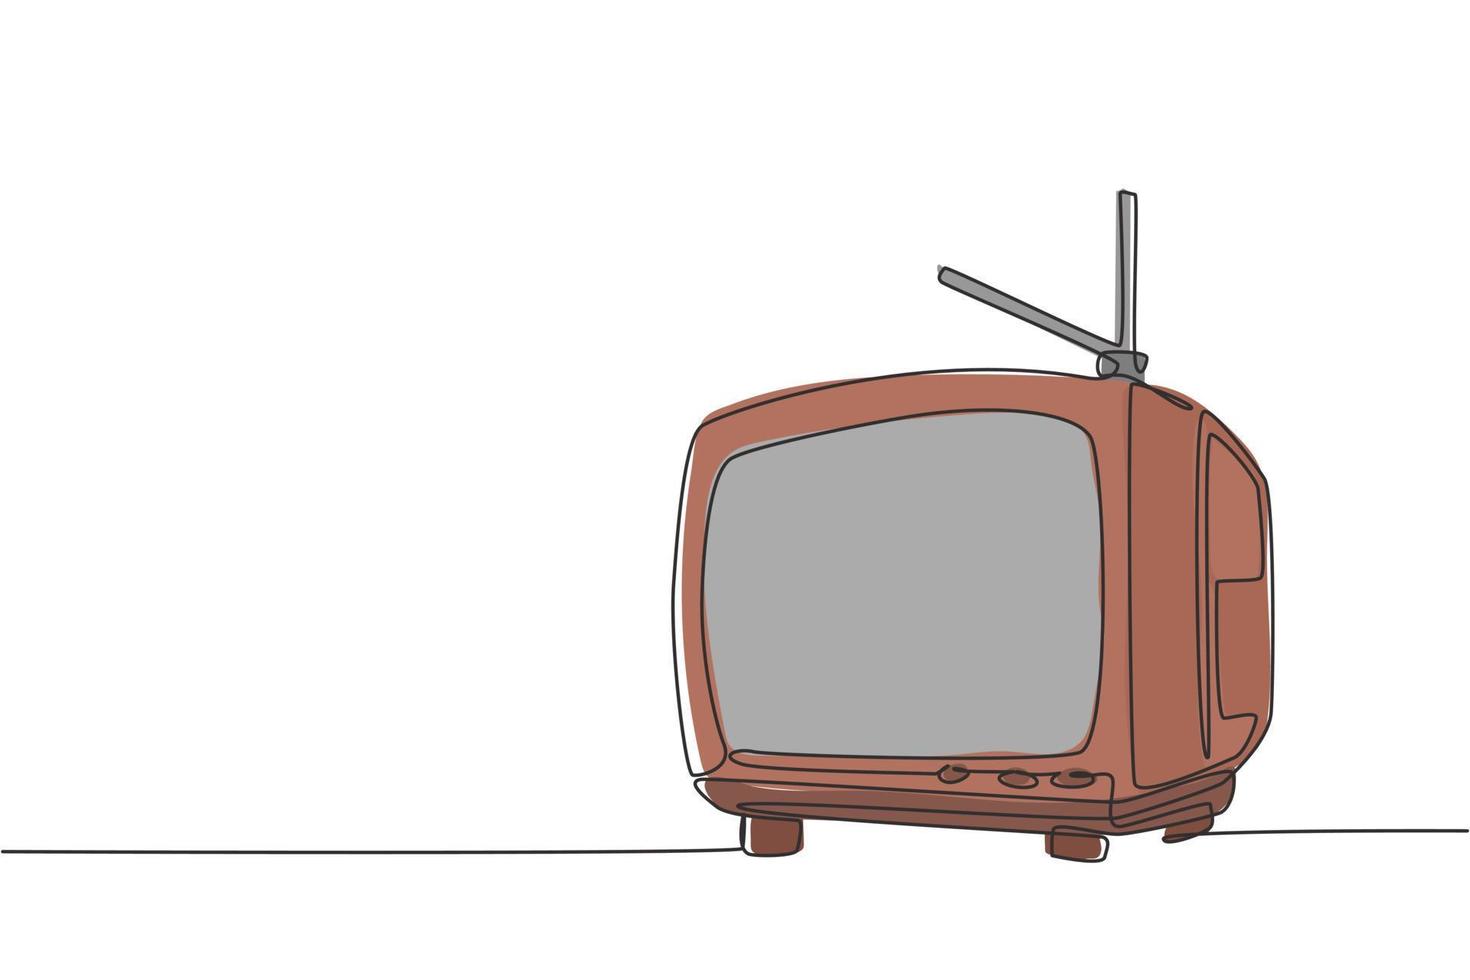 Single continuous line drawing of retro old fashioned tv with internal antenna. Classic vintage analog television concept one line graphic draw design vector illustration